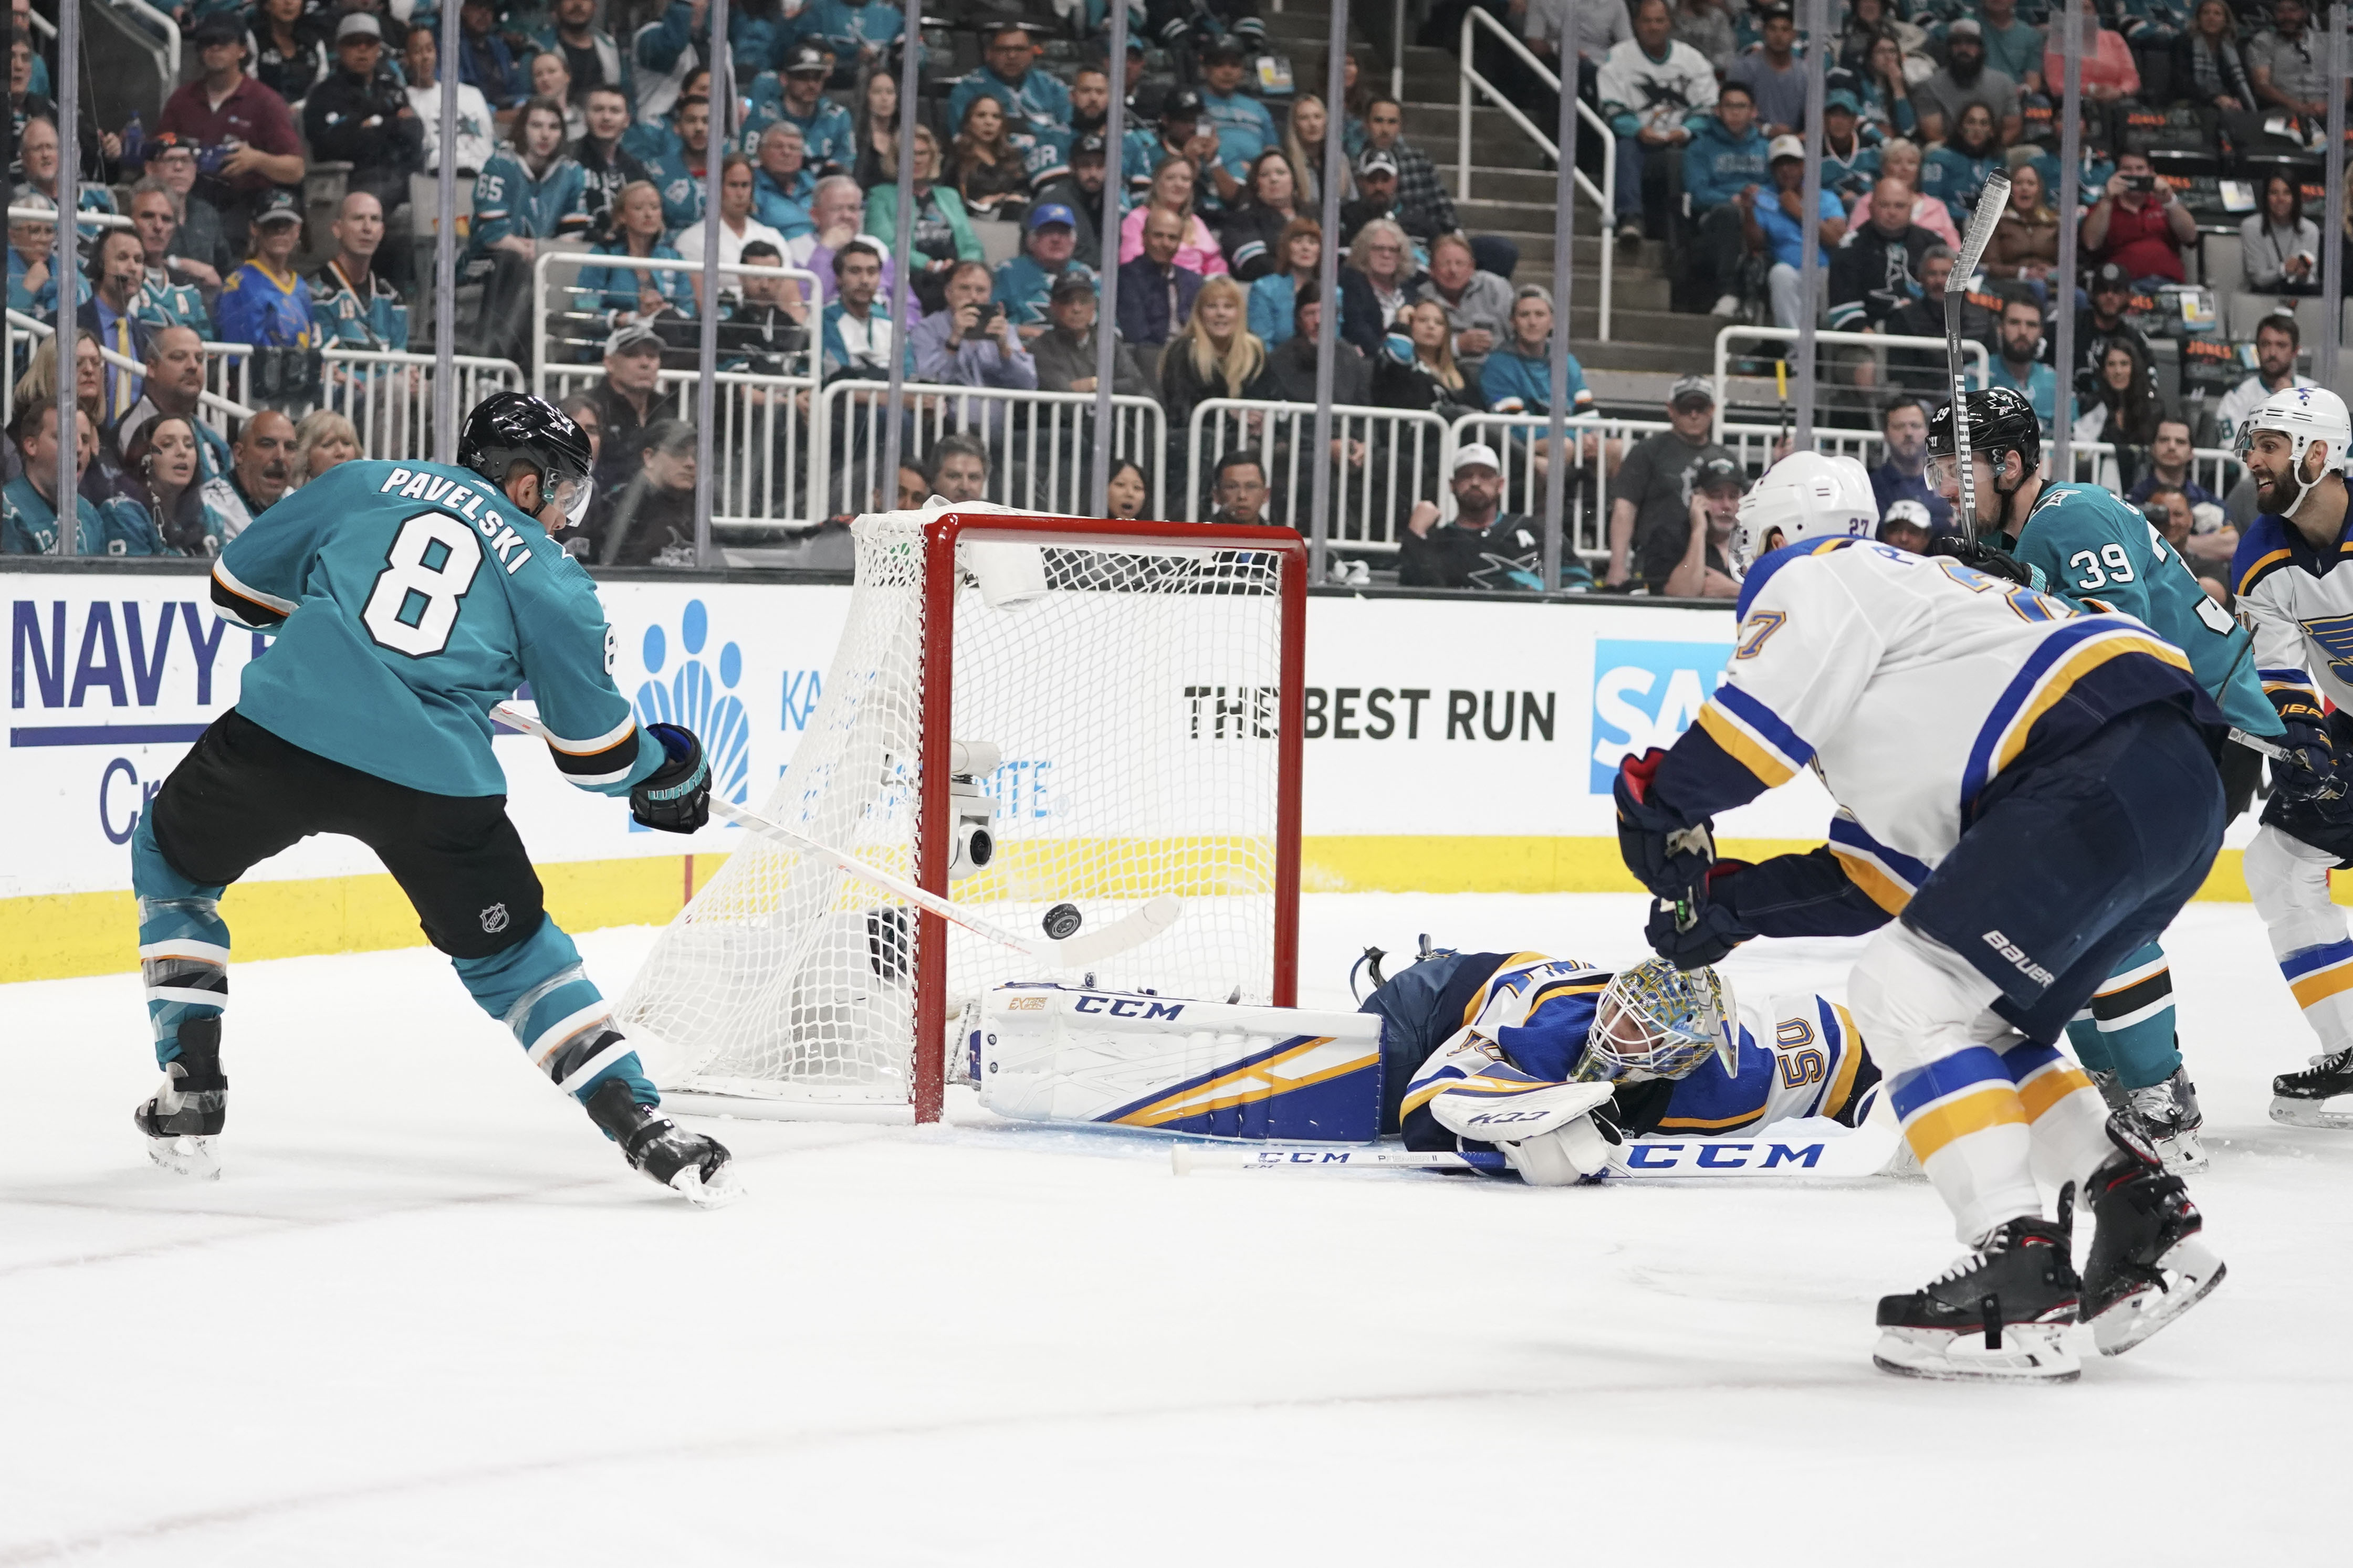 2019-05-12T010917Z_783664160_NOCID_RTRMADP_3_NHL-STANLEY-CUP-PLAYOFFS-ST-LOUIS-BLUES-AT-SAN-JOSE-SHARKS